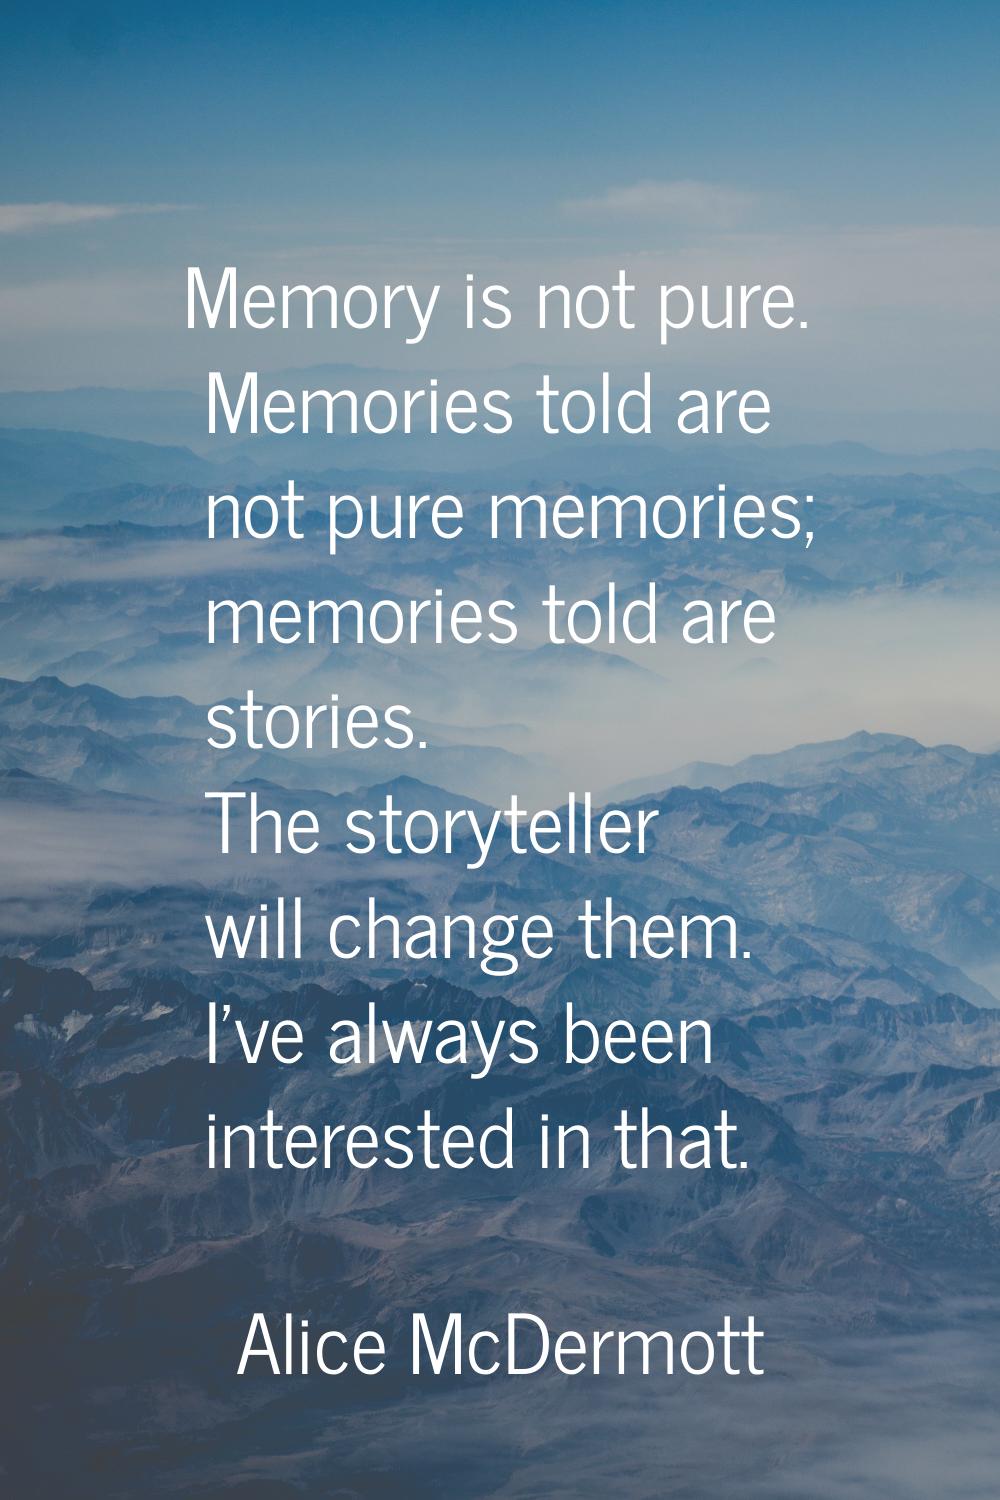 Memory is not pure. Memories told are not pure memories; memories told are stories. The storyteller